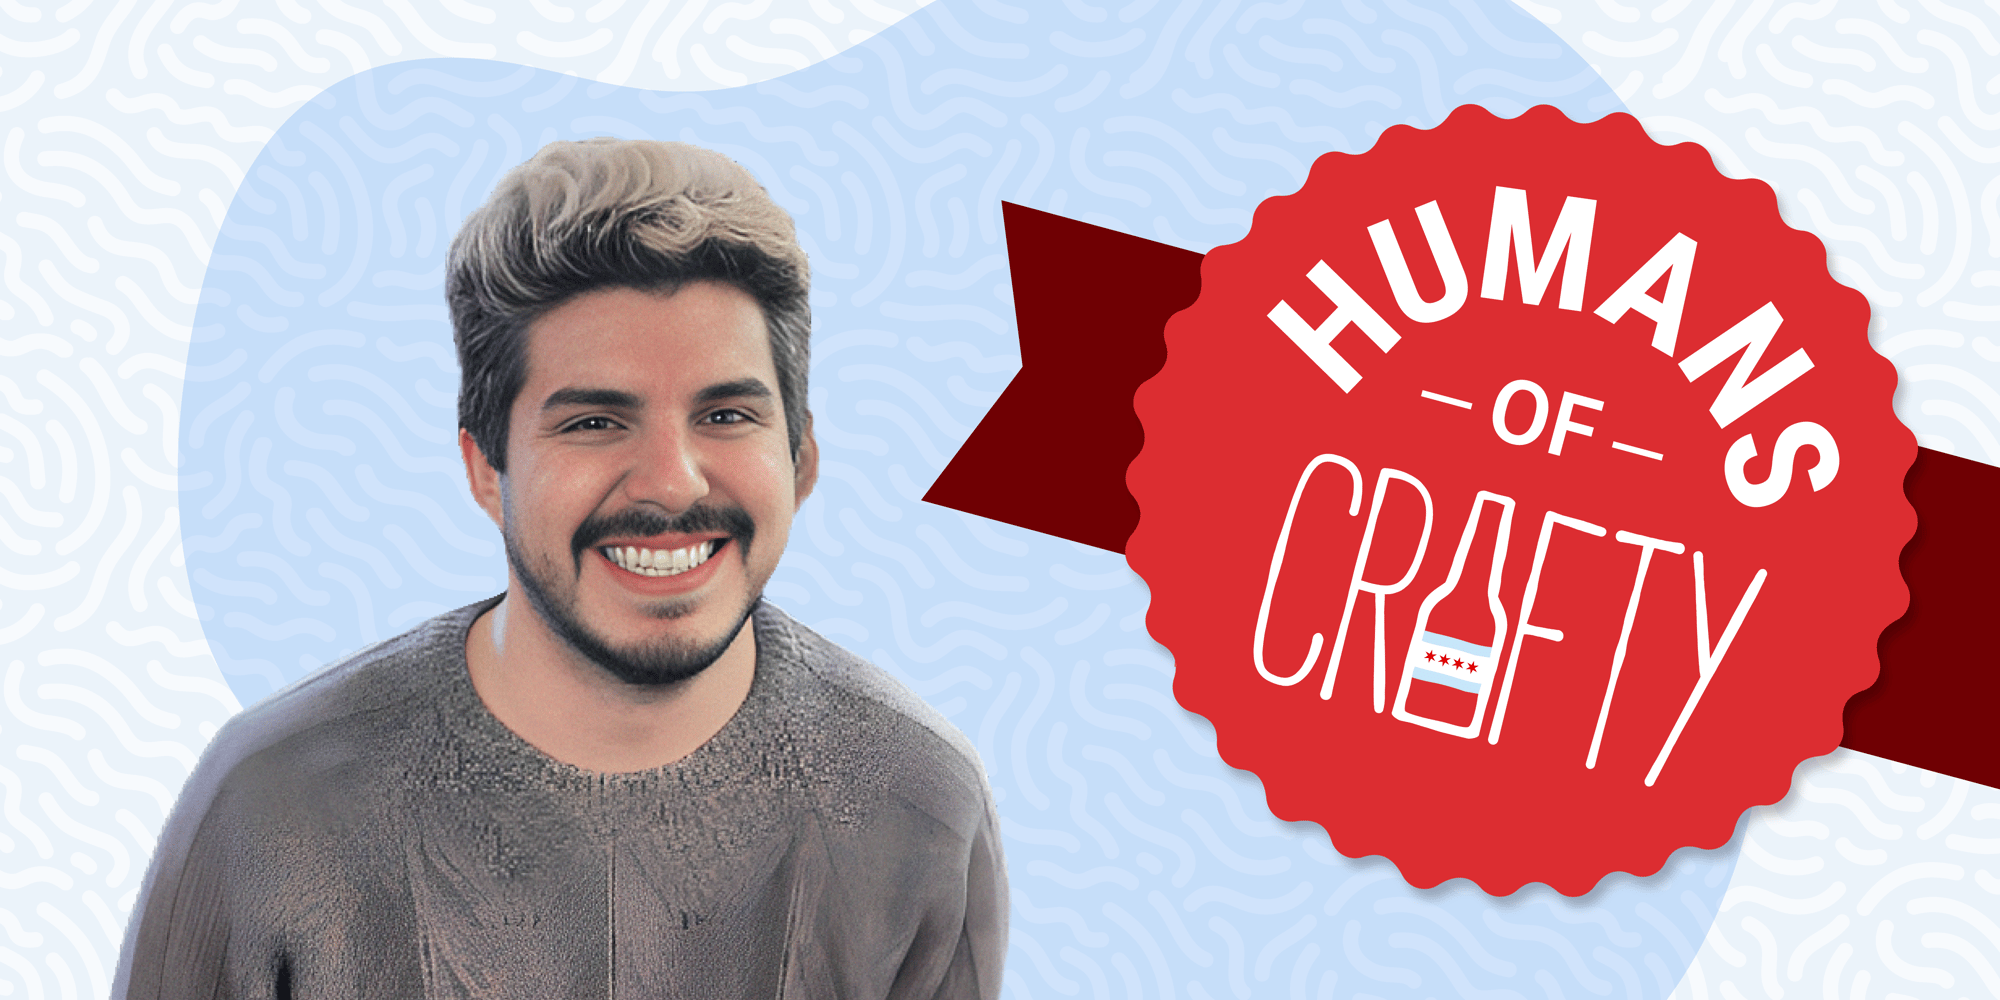 Meet Nick Vakili, Associate Product Manager out of Crafty Chicago